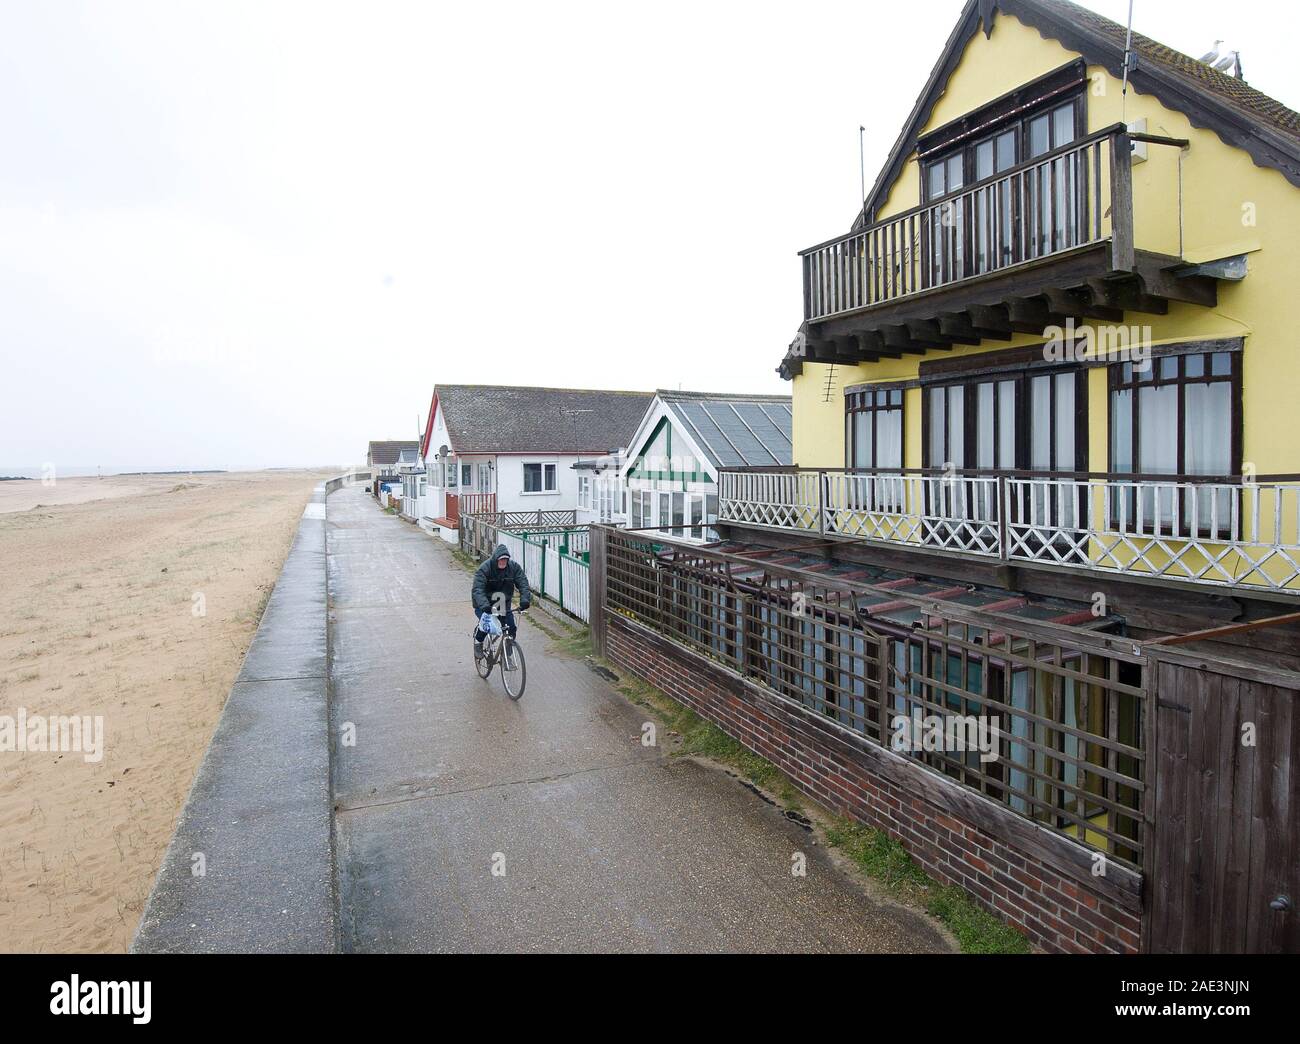 Jaywick, a rundown Essex seaside resort in Tendring near Clacton-on-Sea which has been singled out in an official report as  the most deprived area of England. Stock Photo